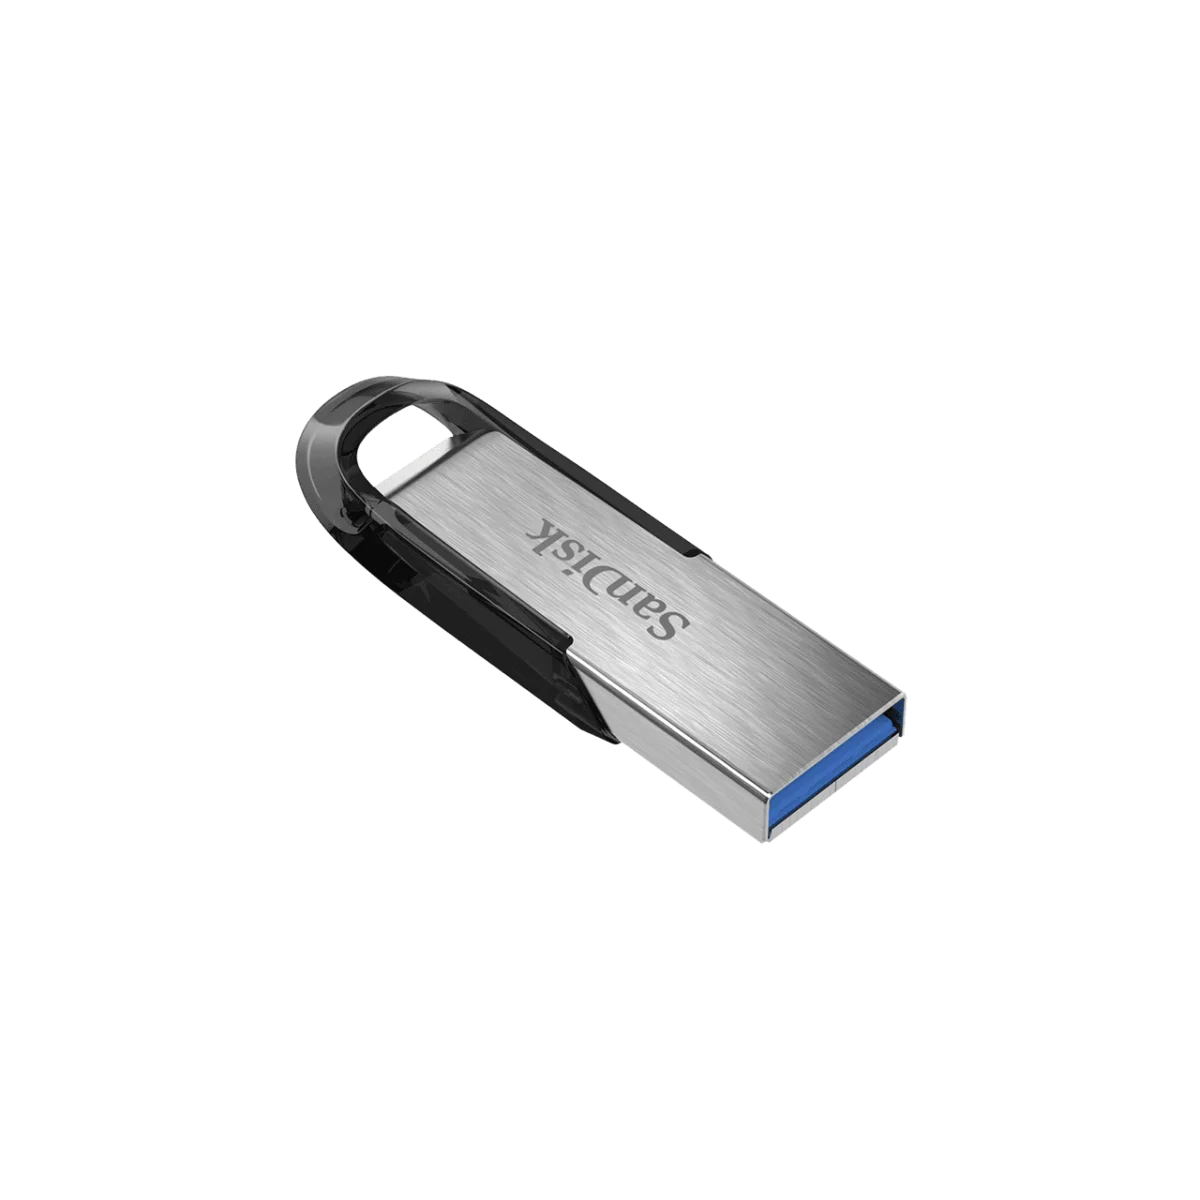 Ultra Flair Usb 3 0 Left.png.thumb .1280.1280 Sandisk &Lt;Div Class=&Quot;Inheritpara Mb-4&Quot;&Gt; The Sandisk Ultra Flair™ Usb 3.0 Flash Drive Moves Your Files Fast. Spend Less Time Waiting To Transfer Files And Enjoy High-Speed Usb 3.0 Performance Of Up To 150Mb/S&Lt;A Class=&Quot;Disclosure&Quot; Tabindex=&Quot;0&Quot; Href=&Quot;Https://Shop.westerndigital.com/Products/Usb-Flash-Drives/Sandisk-Ultra-Flair-Usb-3-0#Disclosures&Quot; Target=&Quot;_Self&Quot; Rel=&Quot;Noopener Noreferrer&Quot; Aria-Labelledby=&Quot;Disclosures&Quot;&Gt;&Lt;Sup&Gt;**&Lt;/Sup&Gt;&Lt;/A&Gt;. Its Durable And Sleek Metal Casing Is Tough Enough To Handle Knocks With Style. And, With Password Protection, You Can Rest Assured That Your Private Files Stay Private&Lt;A Class=&Quot;Disclosure&Quot; Tabindex=&Quot;0&Quot; Href=&Quot;Https://Shop.westerndigital.com/Products/Usb-Flash-Drives/Sandisk-Ultra-Flair-Usb-3-0#Disclosures&Quot; Target=&Quot;_Self&Quot; Rel=&Quot;Noopener Noreferrer&Quot; Aria-Labelledby=&Quot;Disclosures&Quot;&Gt;&Lt;Sup&Gt;1&Lt;/Sup&Gt;&Lt;/A&Gt;. Store Your Files In Style With The Sandisk Ultra Flair Usb 3.0 Flash Drive. &Lt;Strong&Gt;Warranty&Lt;/Strong&Gt; The Sandisk Ultra Flair Usb 3.0 Flash Drive Is Backed By A Five-Year Manufacturer Warranty&Lt;A Class=&Quot;Disclosure&Quot; Tabindex=&Quot;0&Quot; Href=&Quot;Https://Shop.westerndigital.com/Products/Usb-Flash-Drives/Sandisk-Ultra-Flair-Usb-3-0#Disclosures&Quot; Target=&Quot;_Self&Quot; Rel=&Quot;Noopener Noreferrer&Quot; Aria-Labelledby=&Quot;Disclosures&Quot;&Gt;&Lt;Sup&Gt;2&Lt;/Sup&Gt;&Lt;/A&Gt; &Lt;/Div&Gt; Flash Drive Sandisk Ultra Flair Usb 3.0 Flash Drive (64Gb)